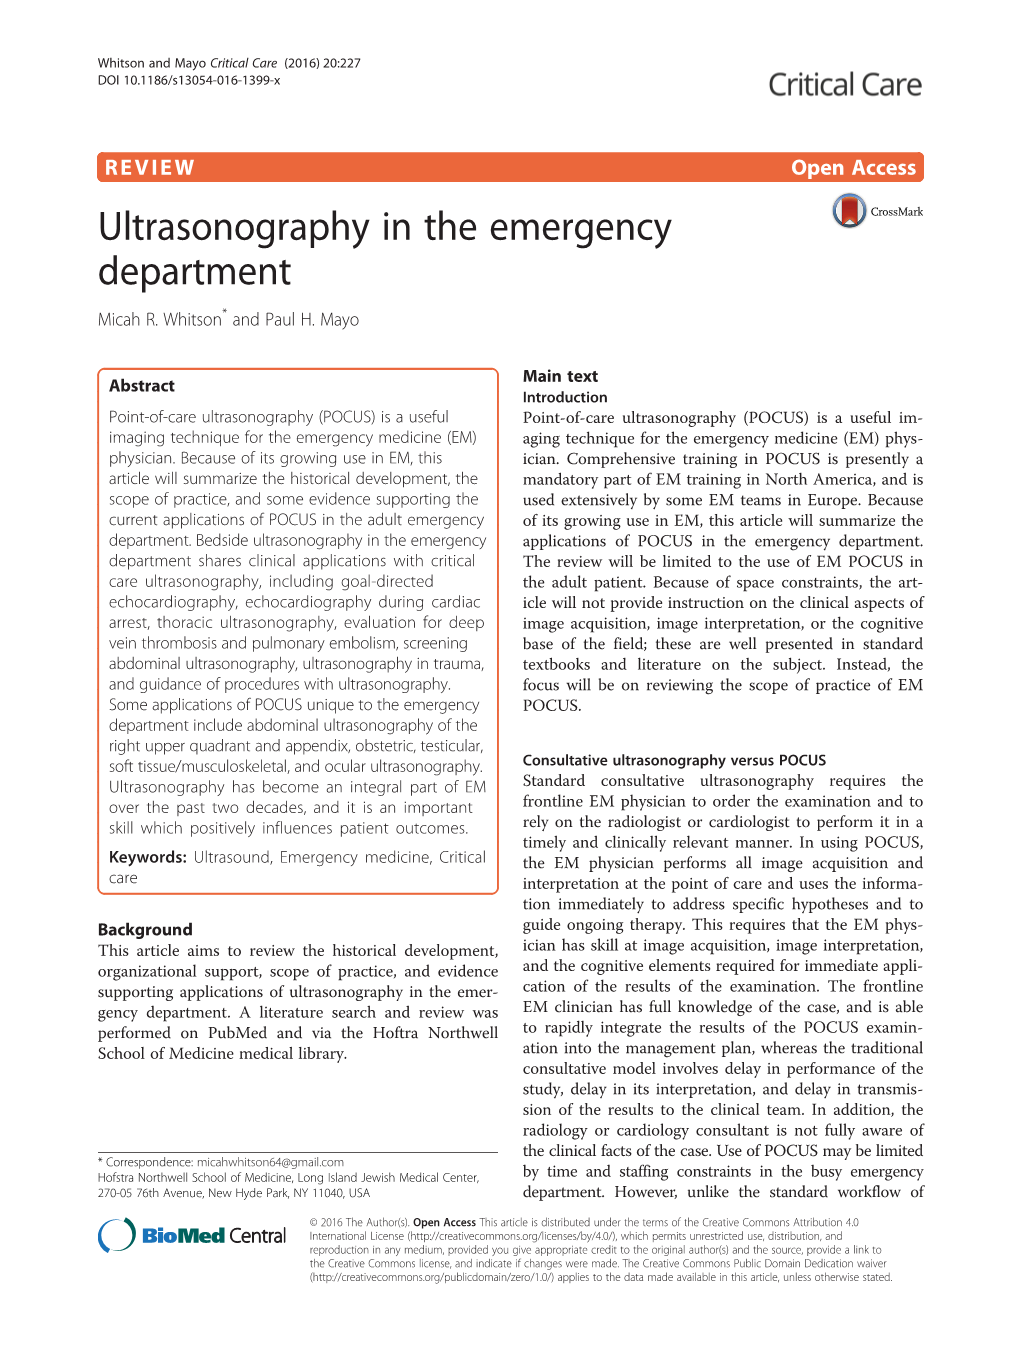 Ultrasonography in the Emergency Department Micah R